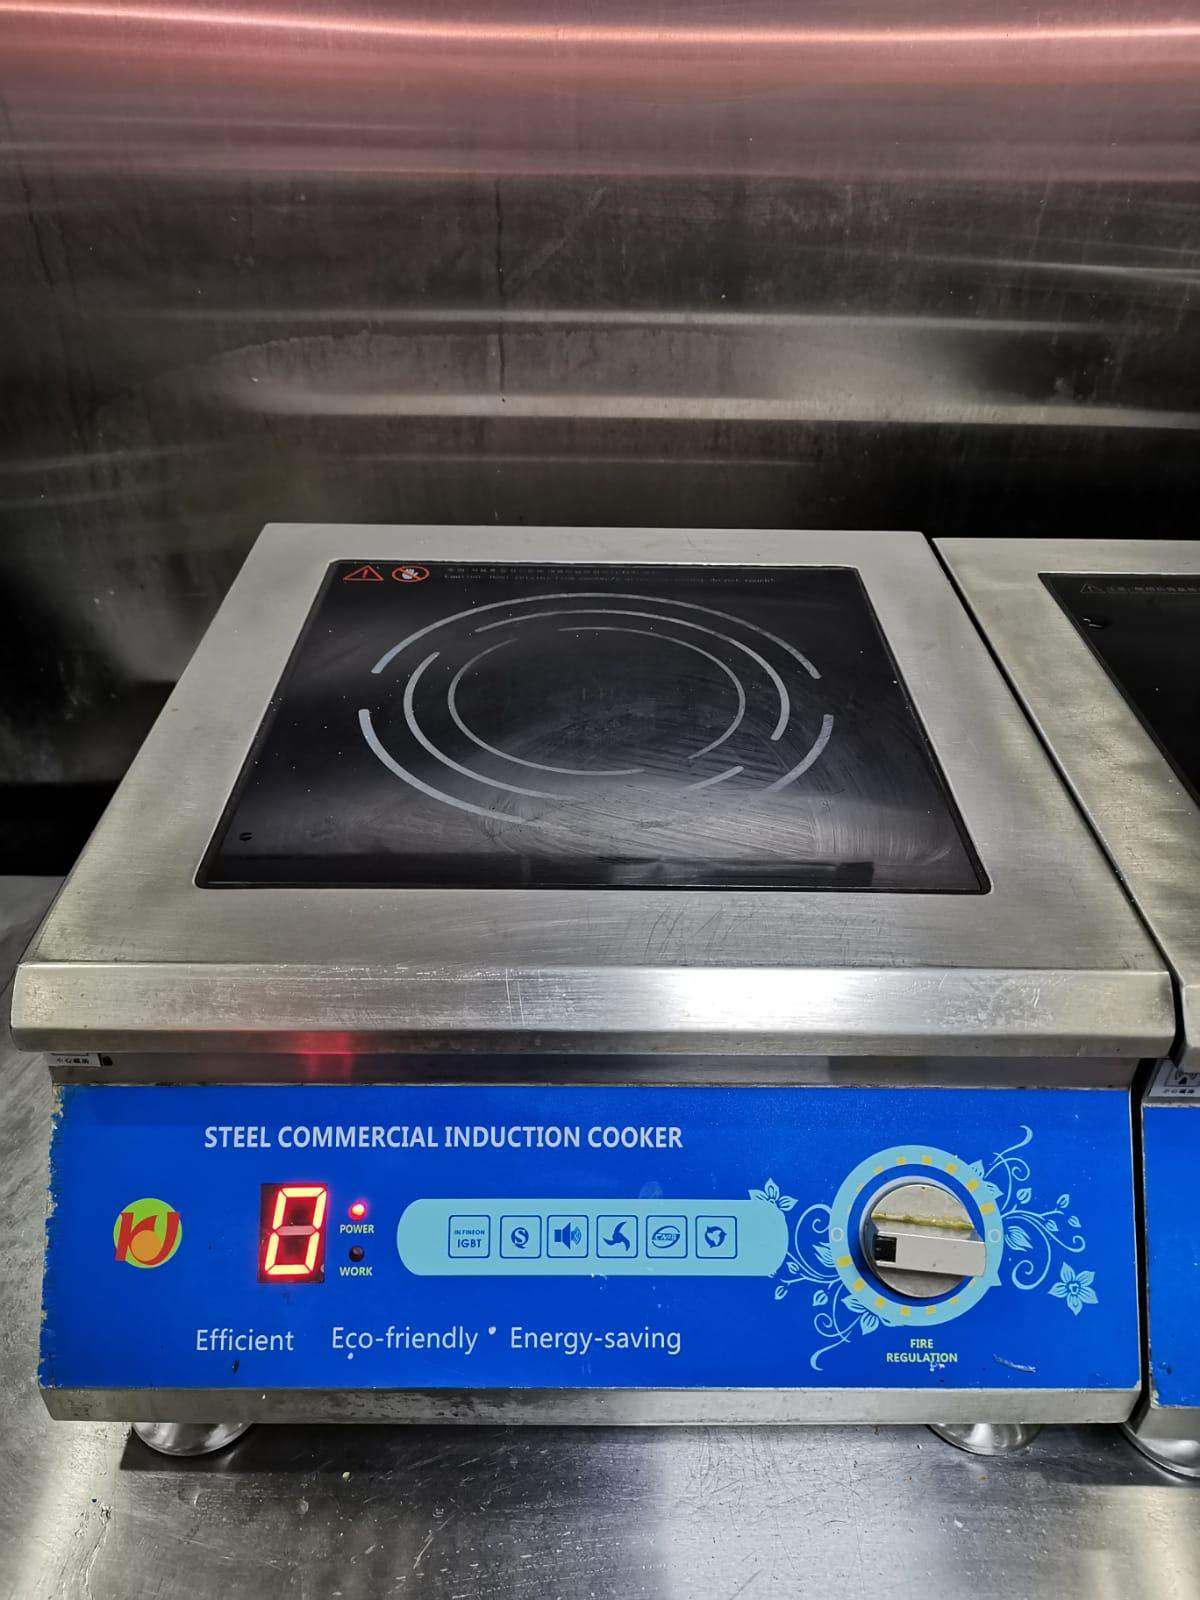 Induction cooker used at Man Tang Hong (Image courtesy of Happy Folks Pte Ltd)